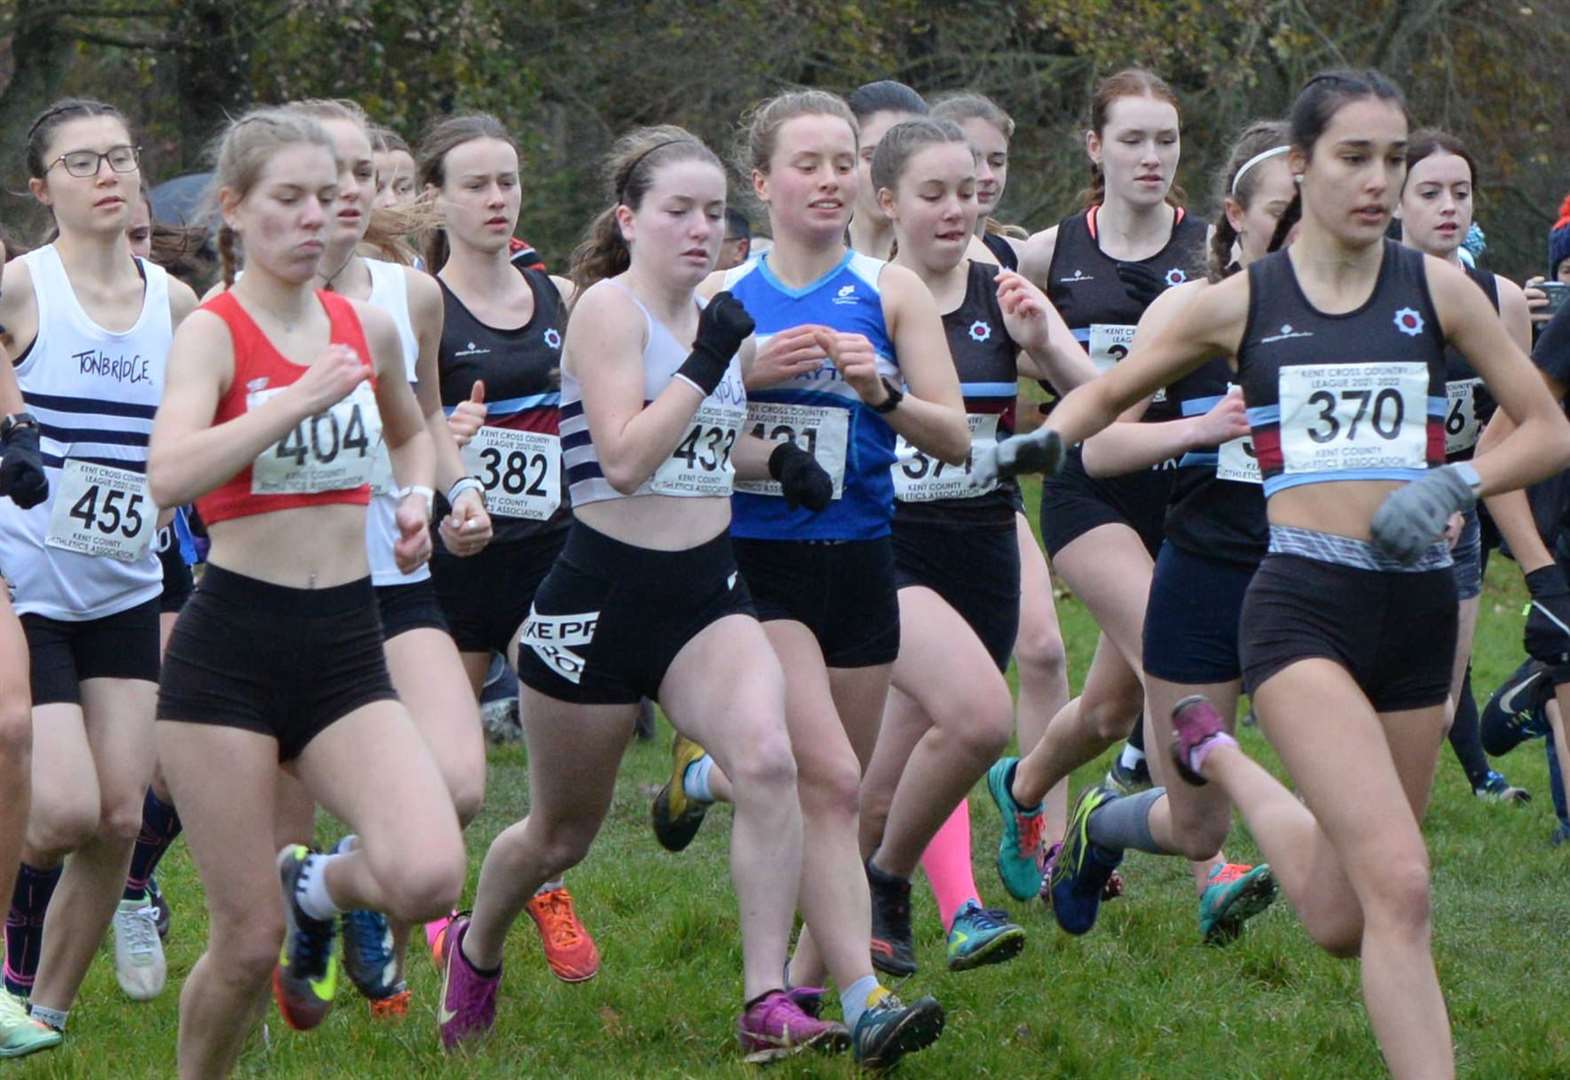 The best pictures from the Kent Cross-Country League at Footscray Meadows